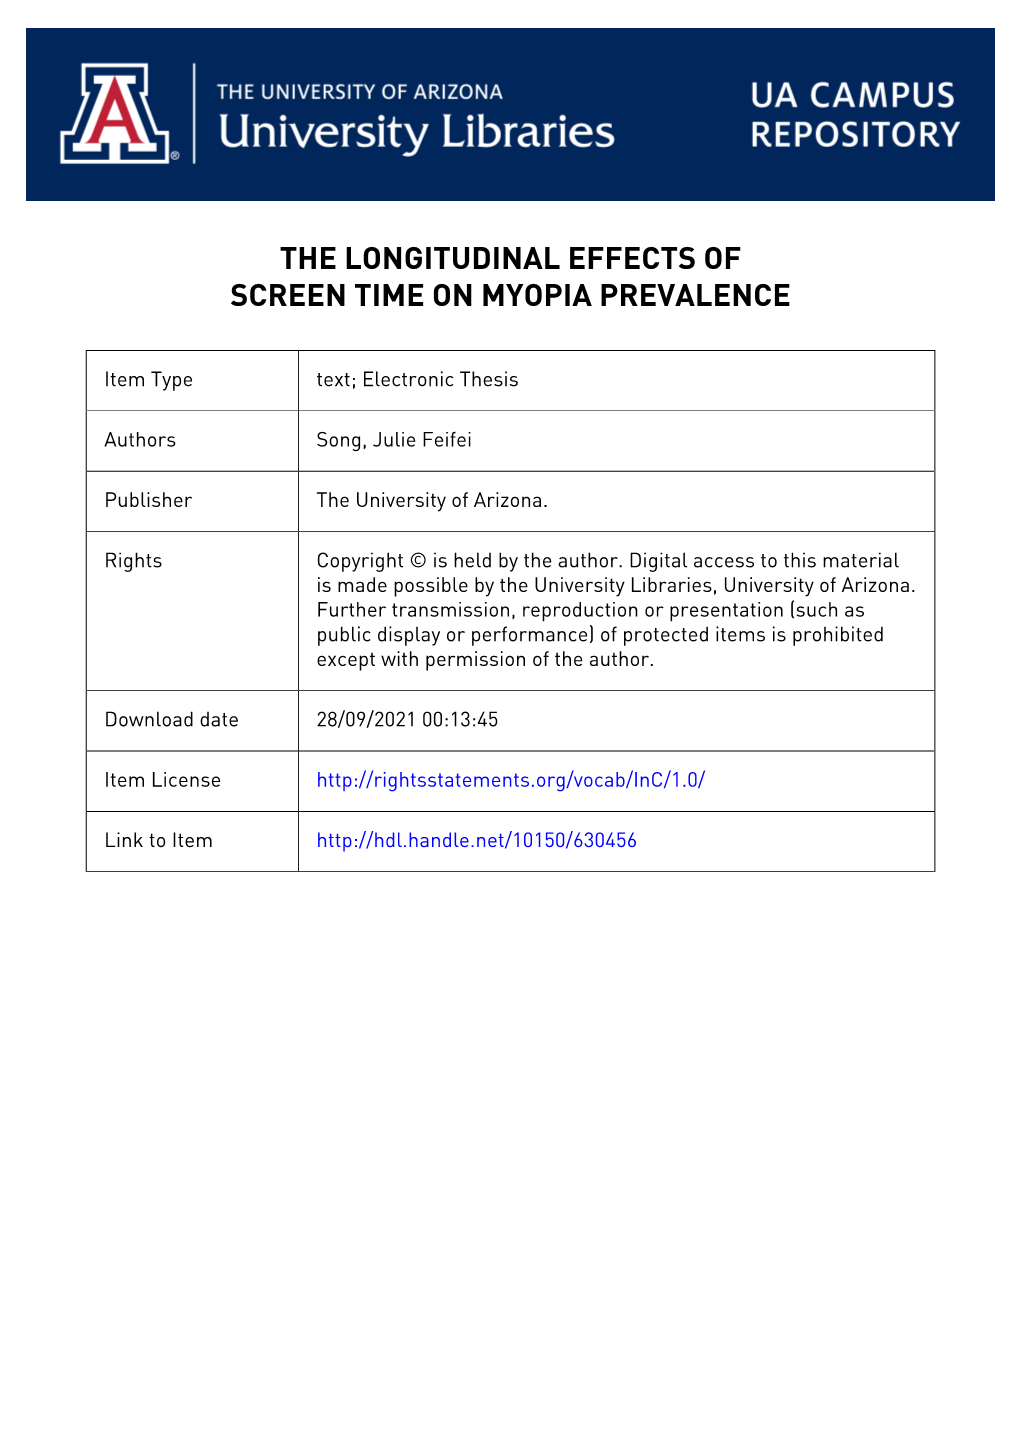 The Longitudinal Effects of Screen Time on Myopia Prevalence